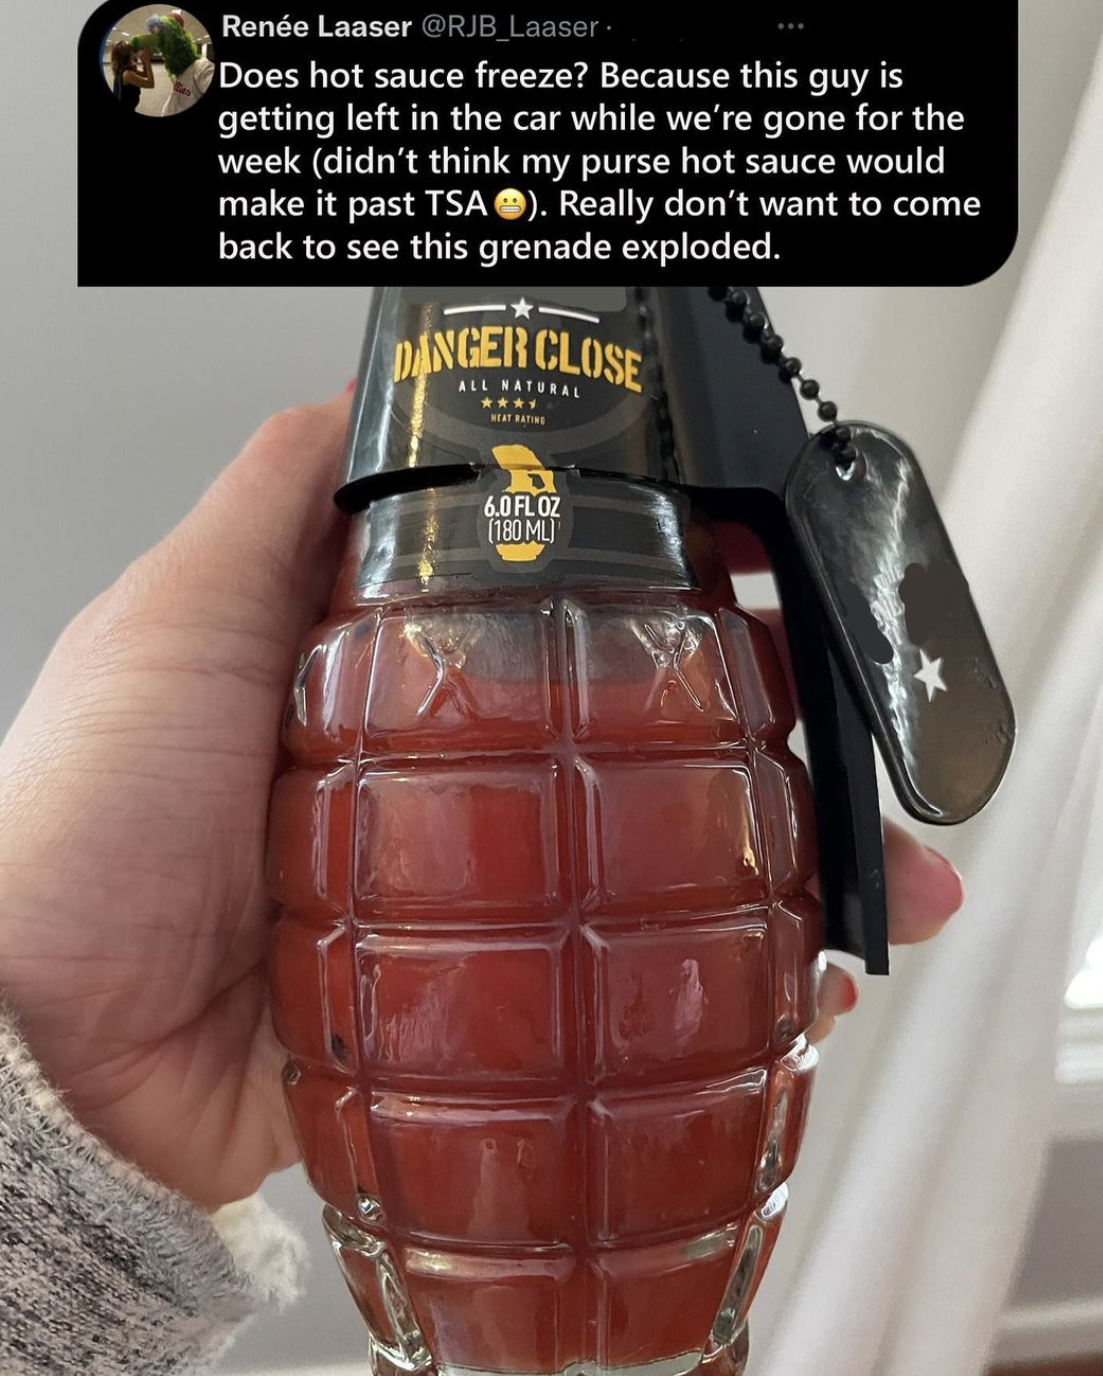 Rene Laaser Does hot sauce freeze? Because this guy is getting left in the car while we're gone for the week didn't think my purse hot sauce would make it past Tsa. Really don't want to come back to see this grenade exploded. Danger Close 6.0 Floz 180 Mu